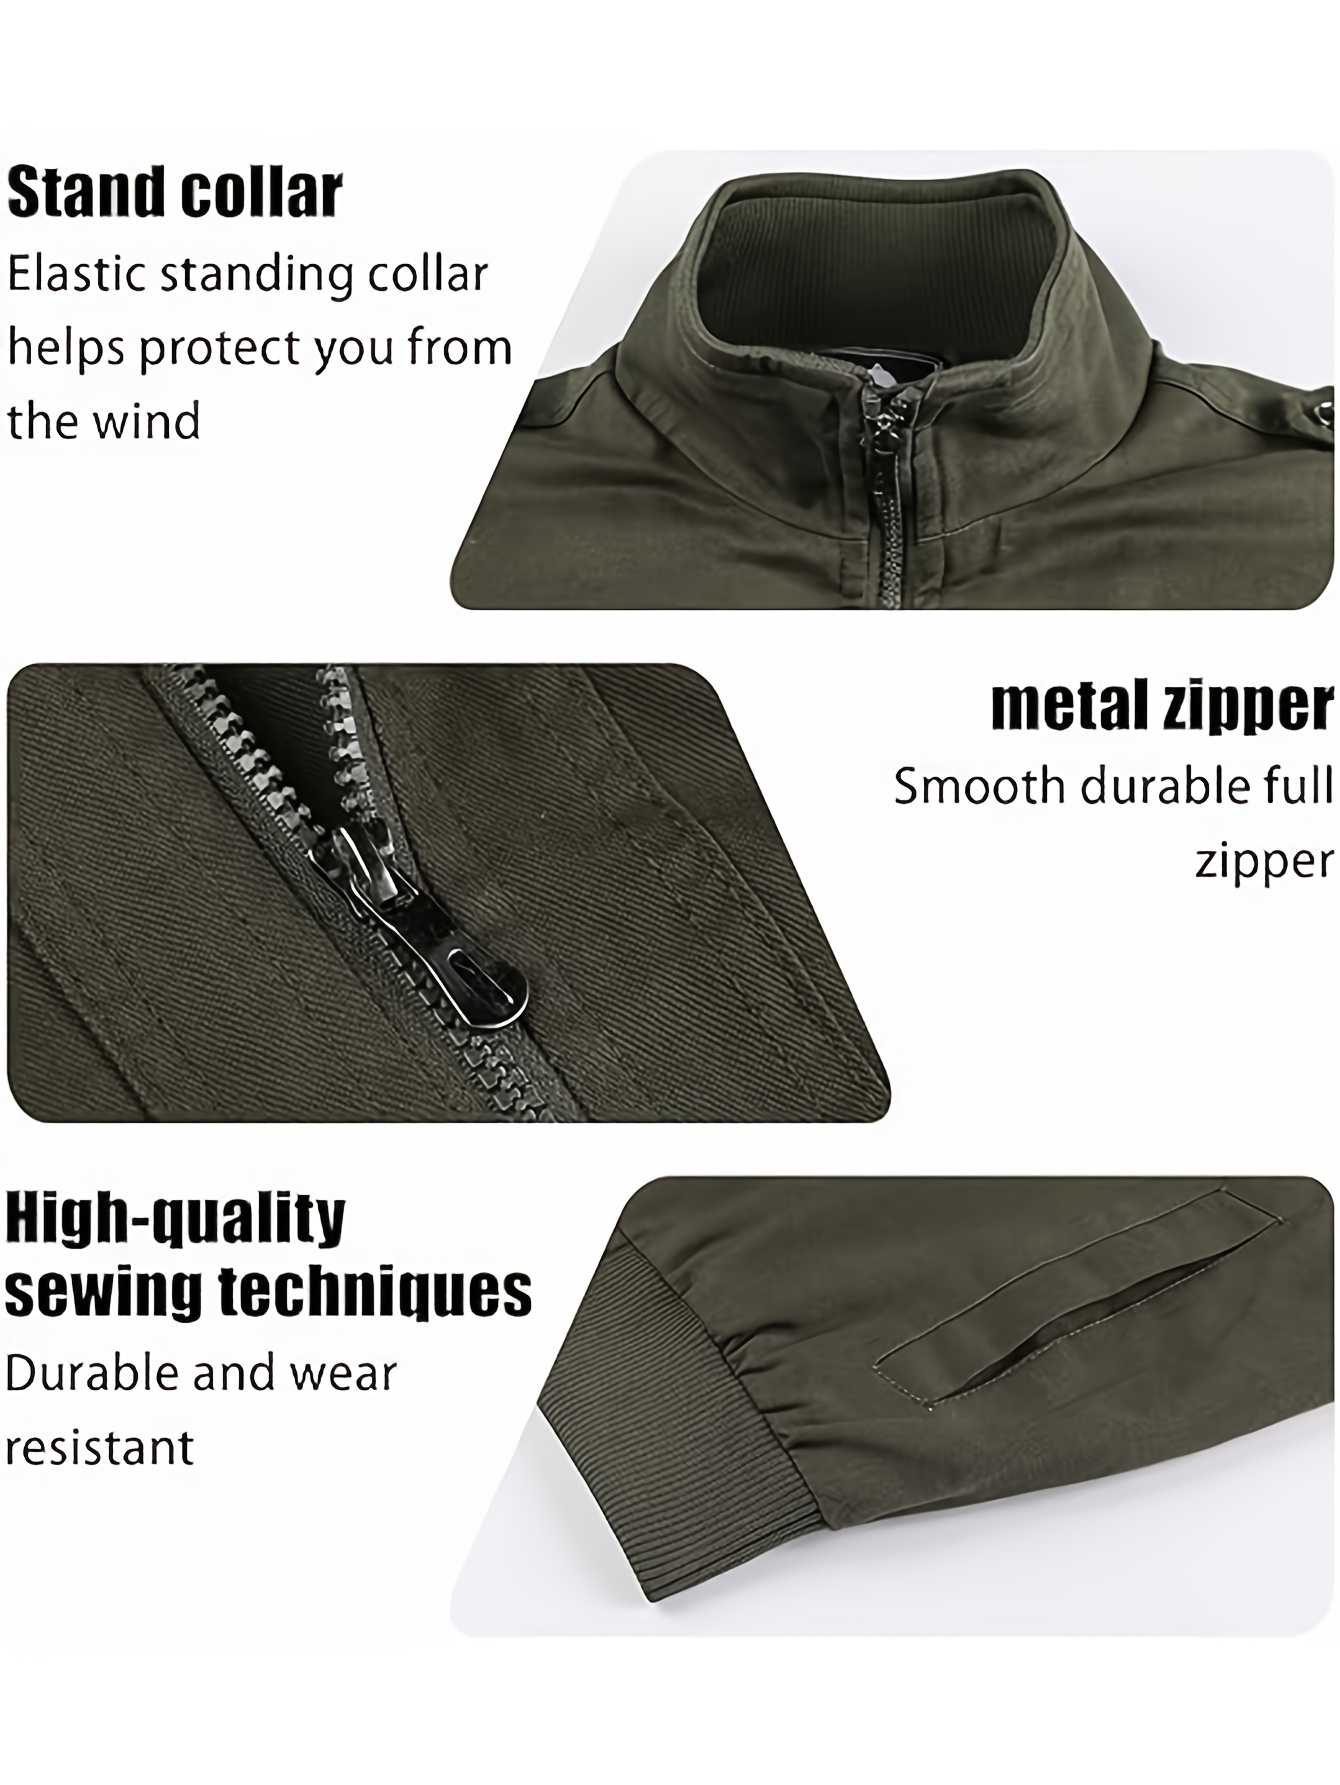  JEShifangjiusu Men'S Casual Washed Cotton Military Jacket  Spring Falls Cargo Bomber Outwear Stand Collar Pocket Jacket Coat (Medium, Army Green) : Sports & Outdoors